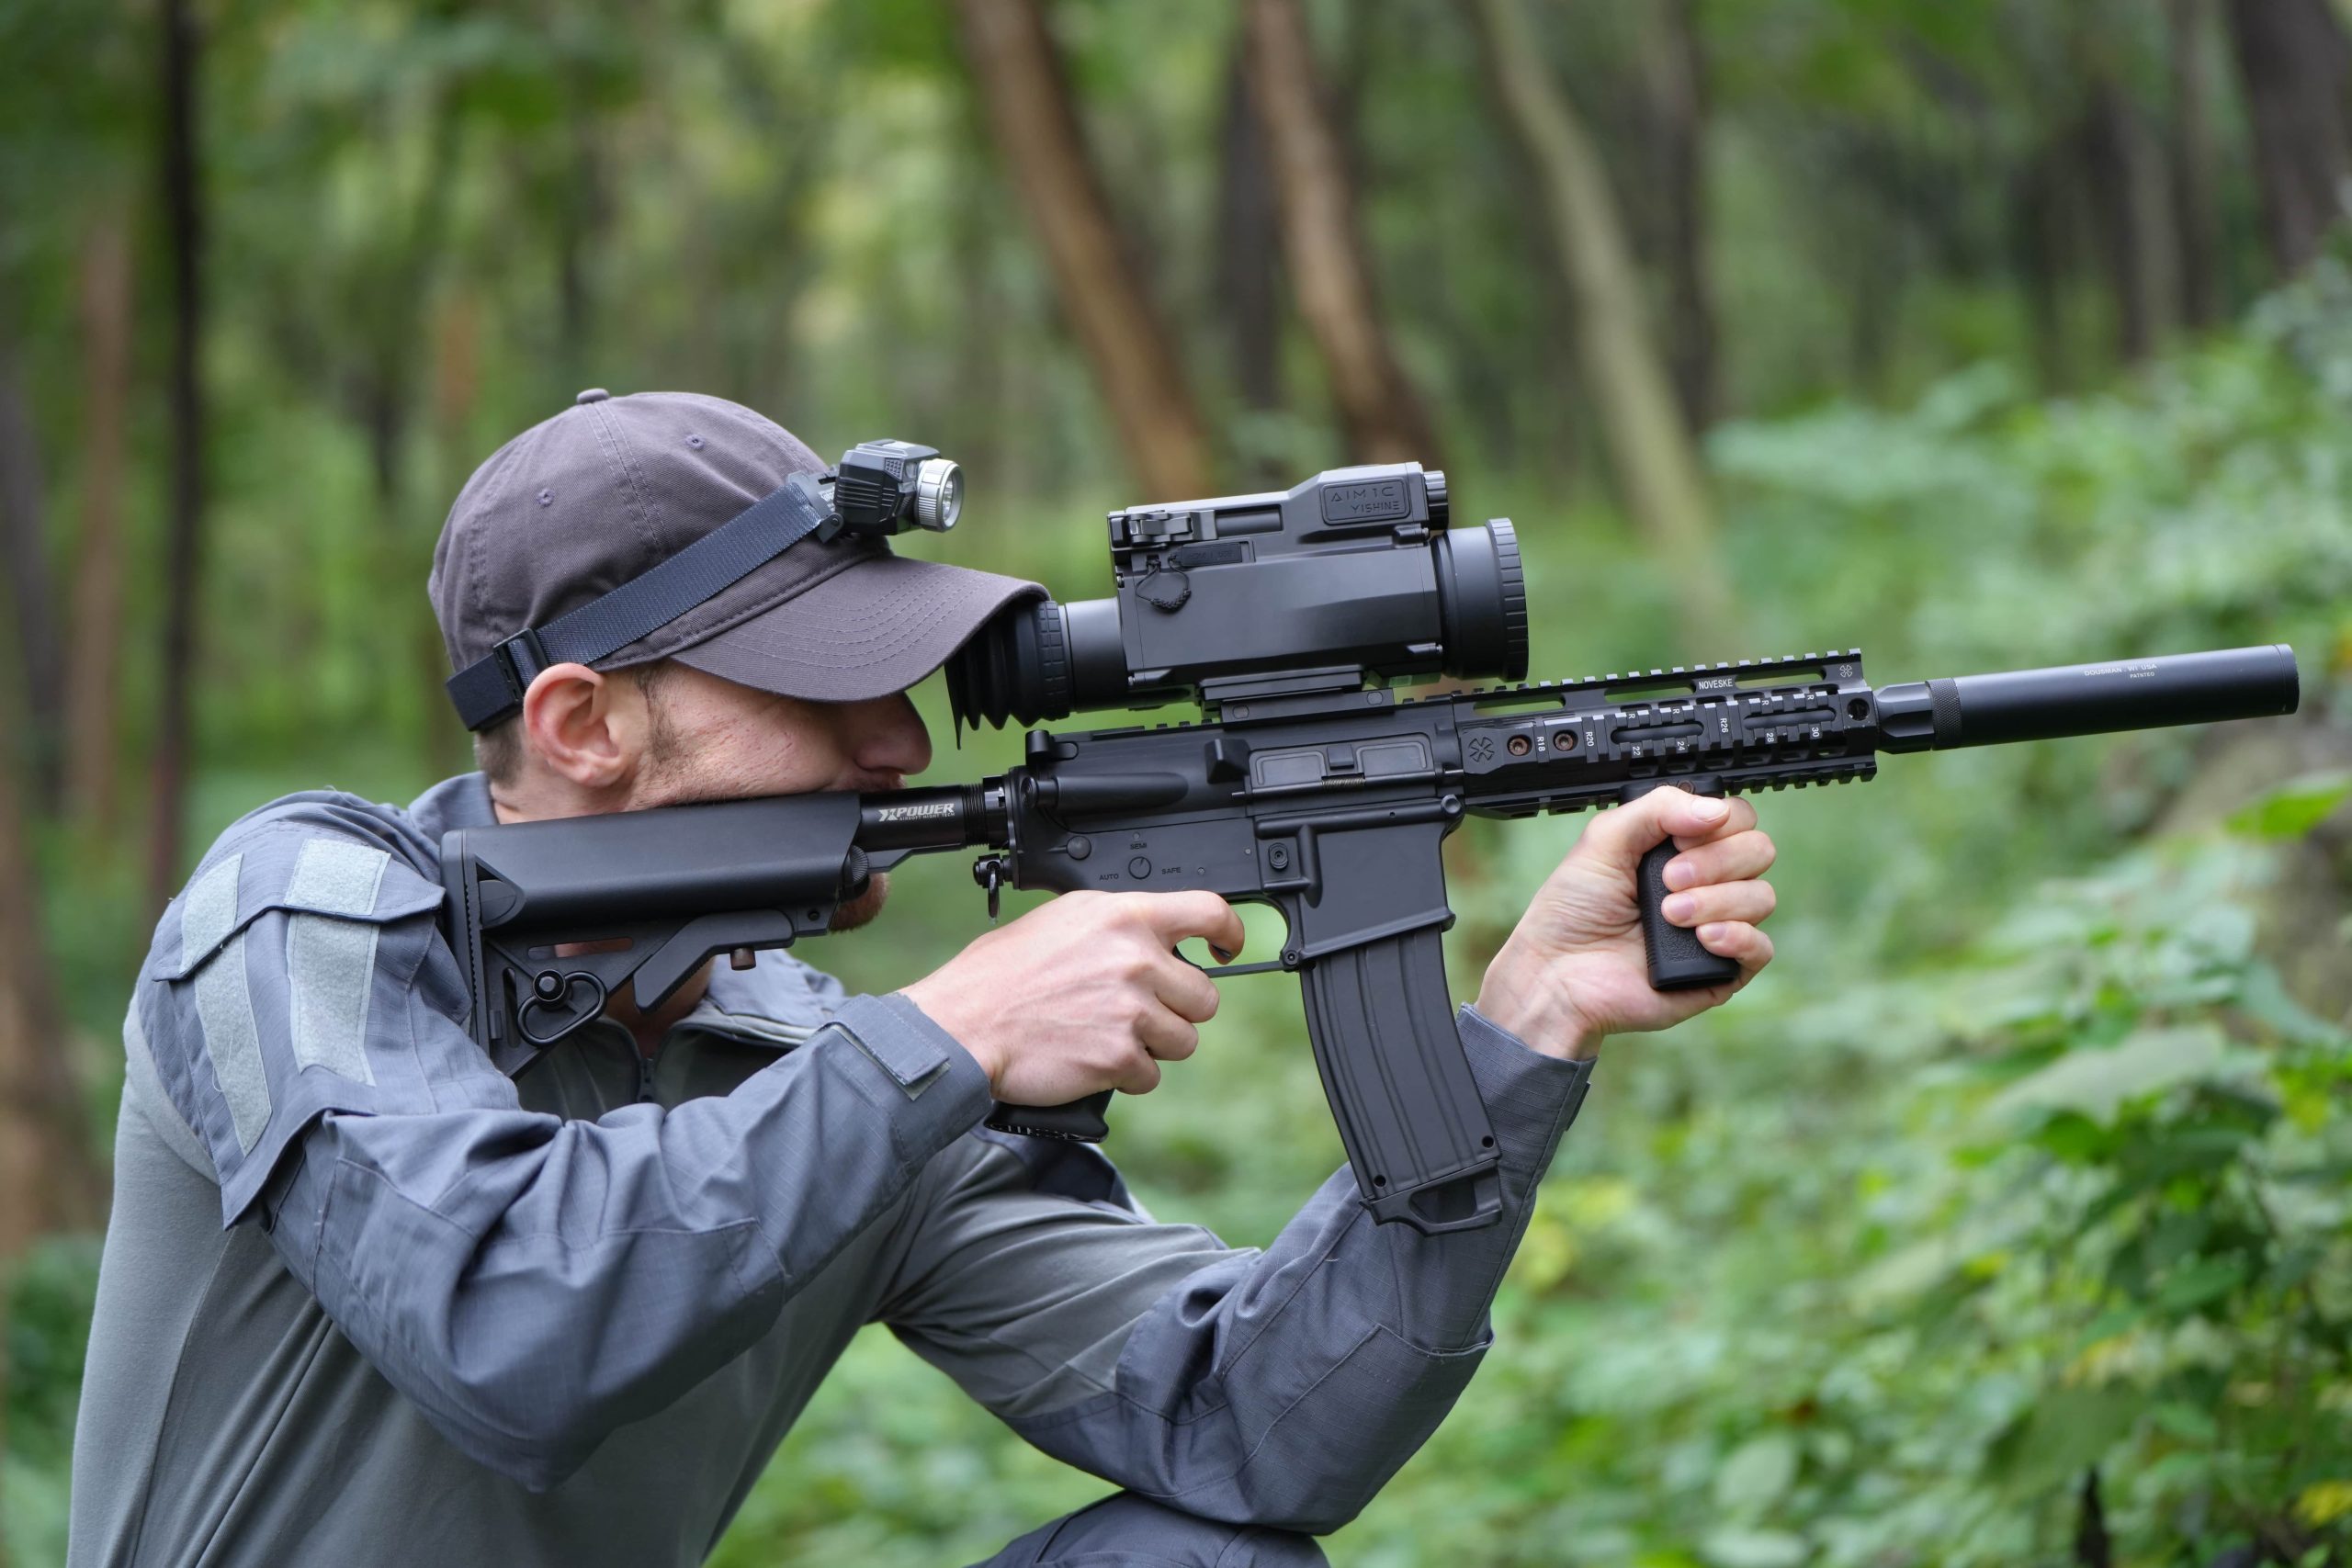 The man is using a monocular to aim at his prey, with a jungle behind him